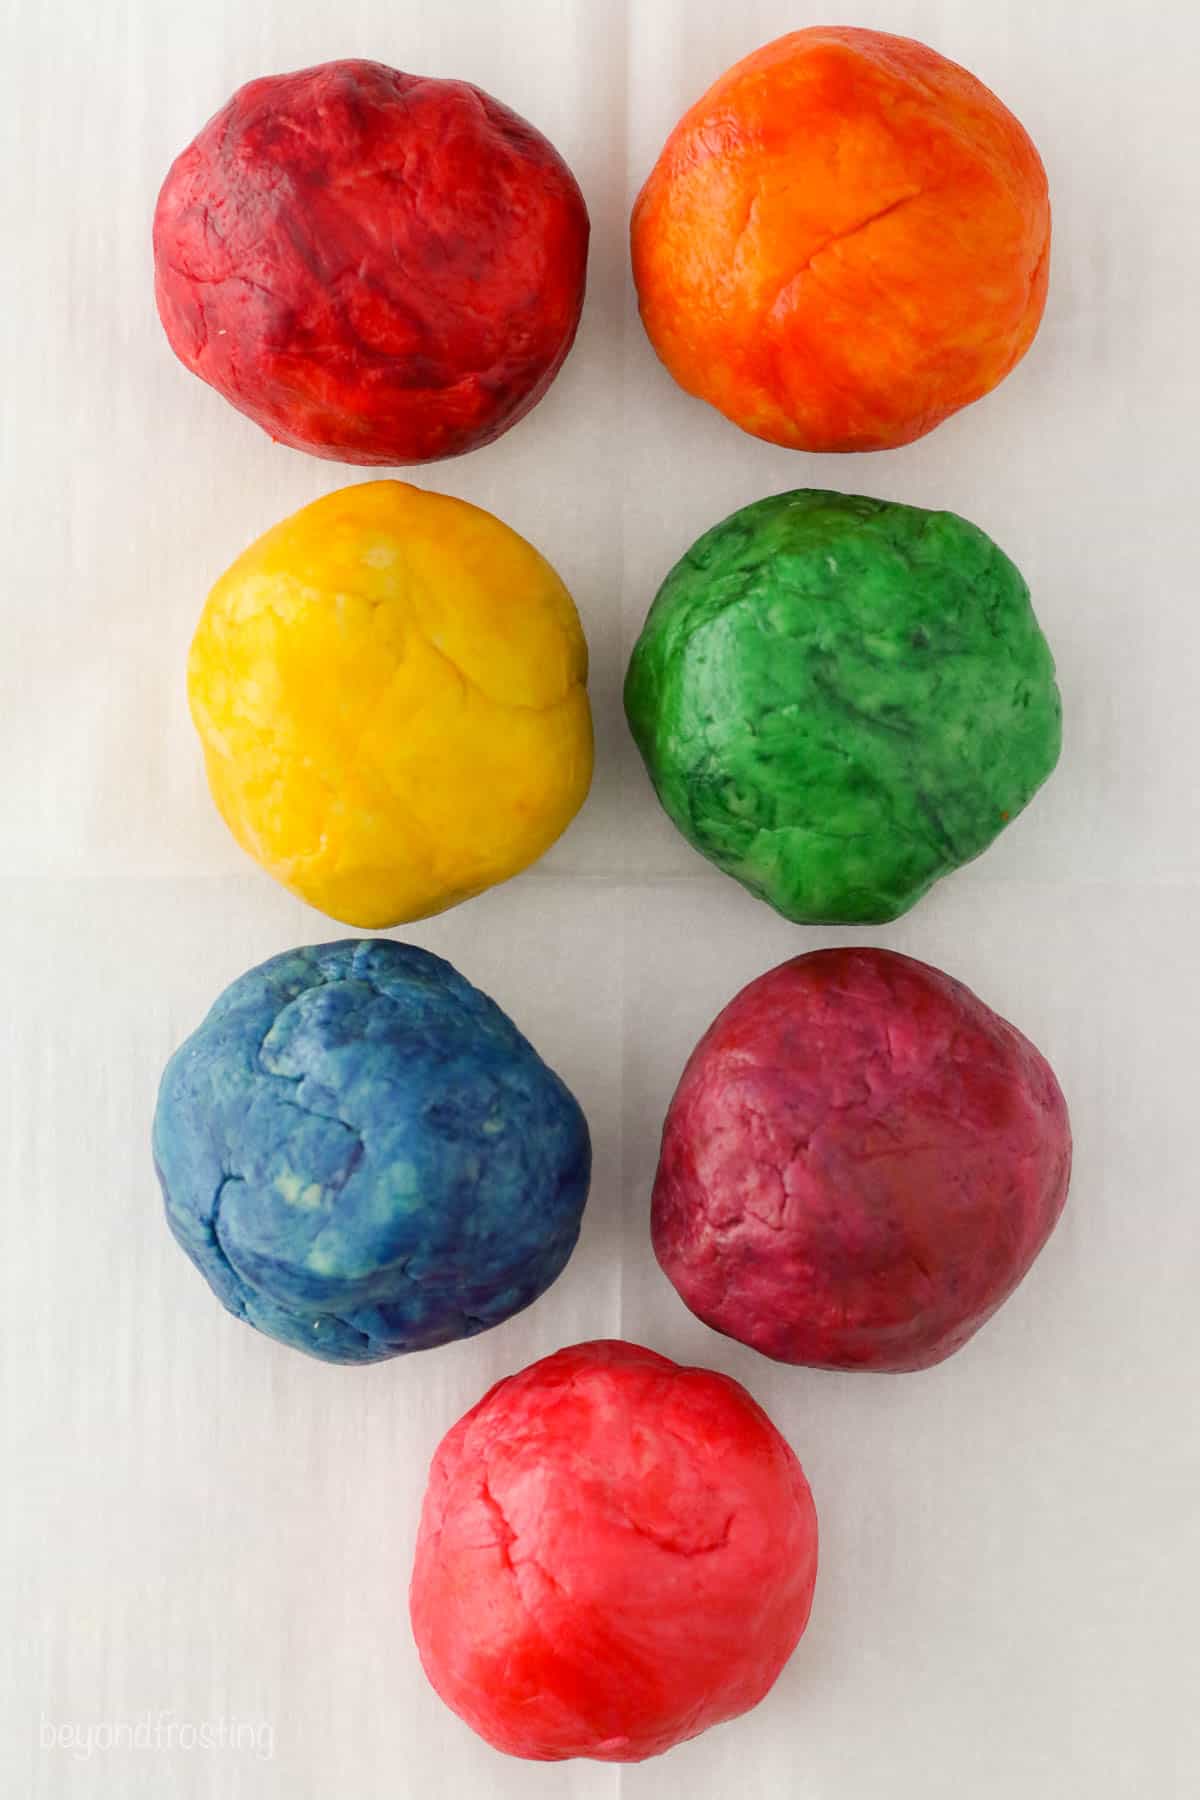 Seven balls of dyed sugar cookie dough